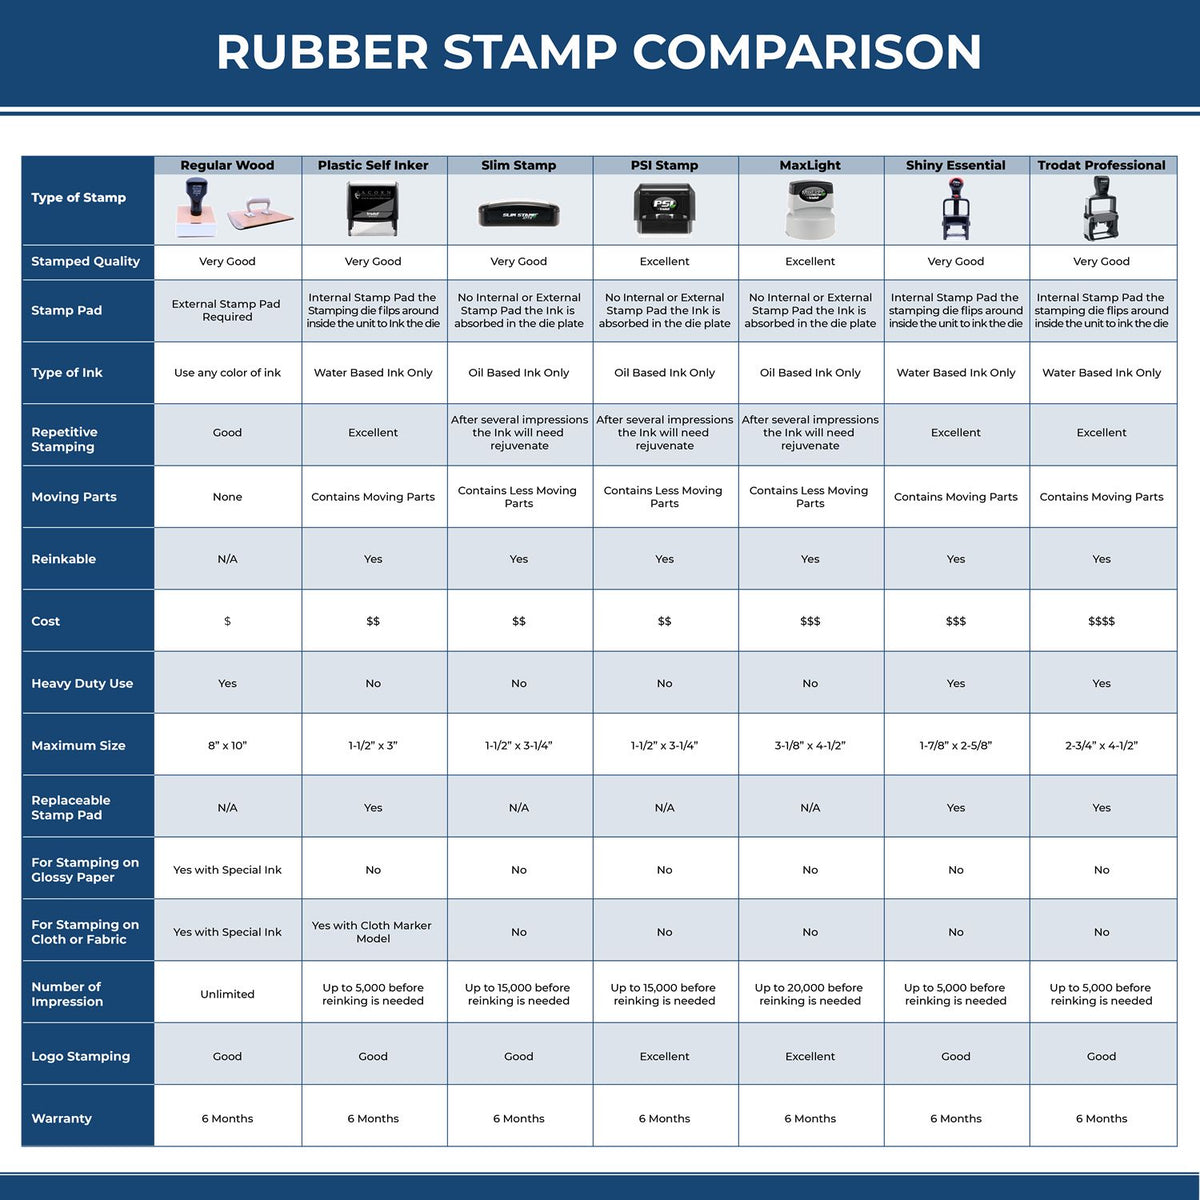 Large Self-Inking PAL Stamp 4954S Rubber Stamp Comparison